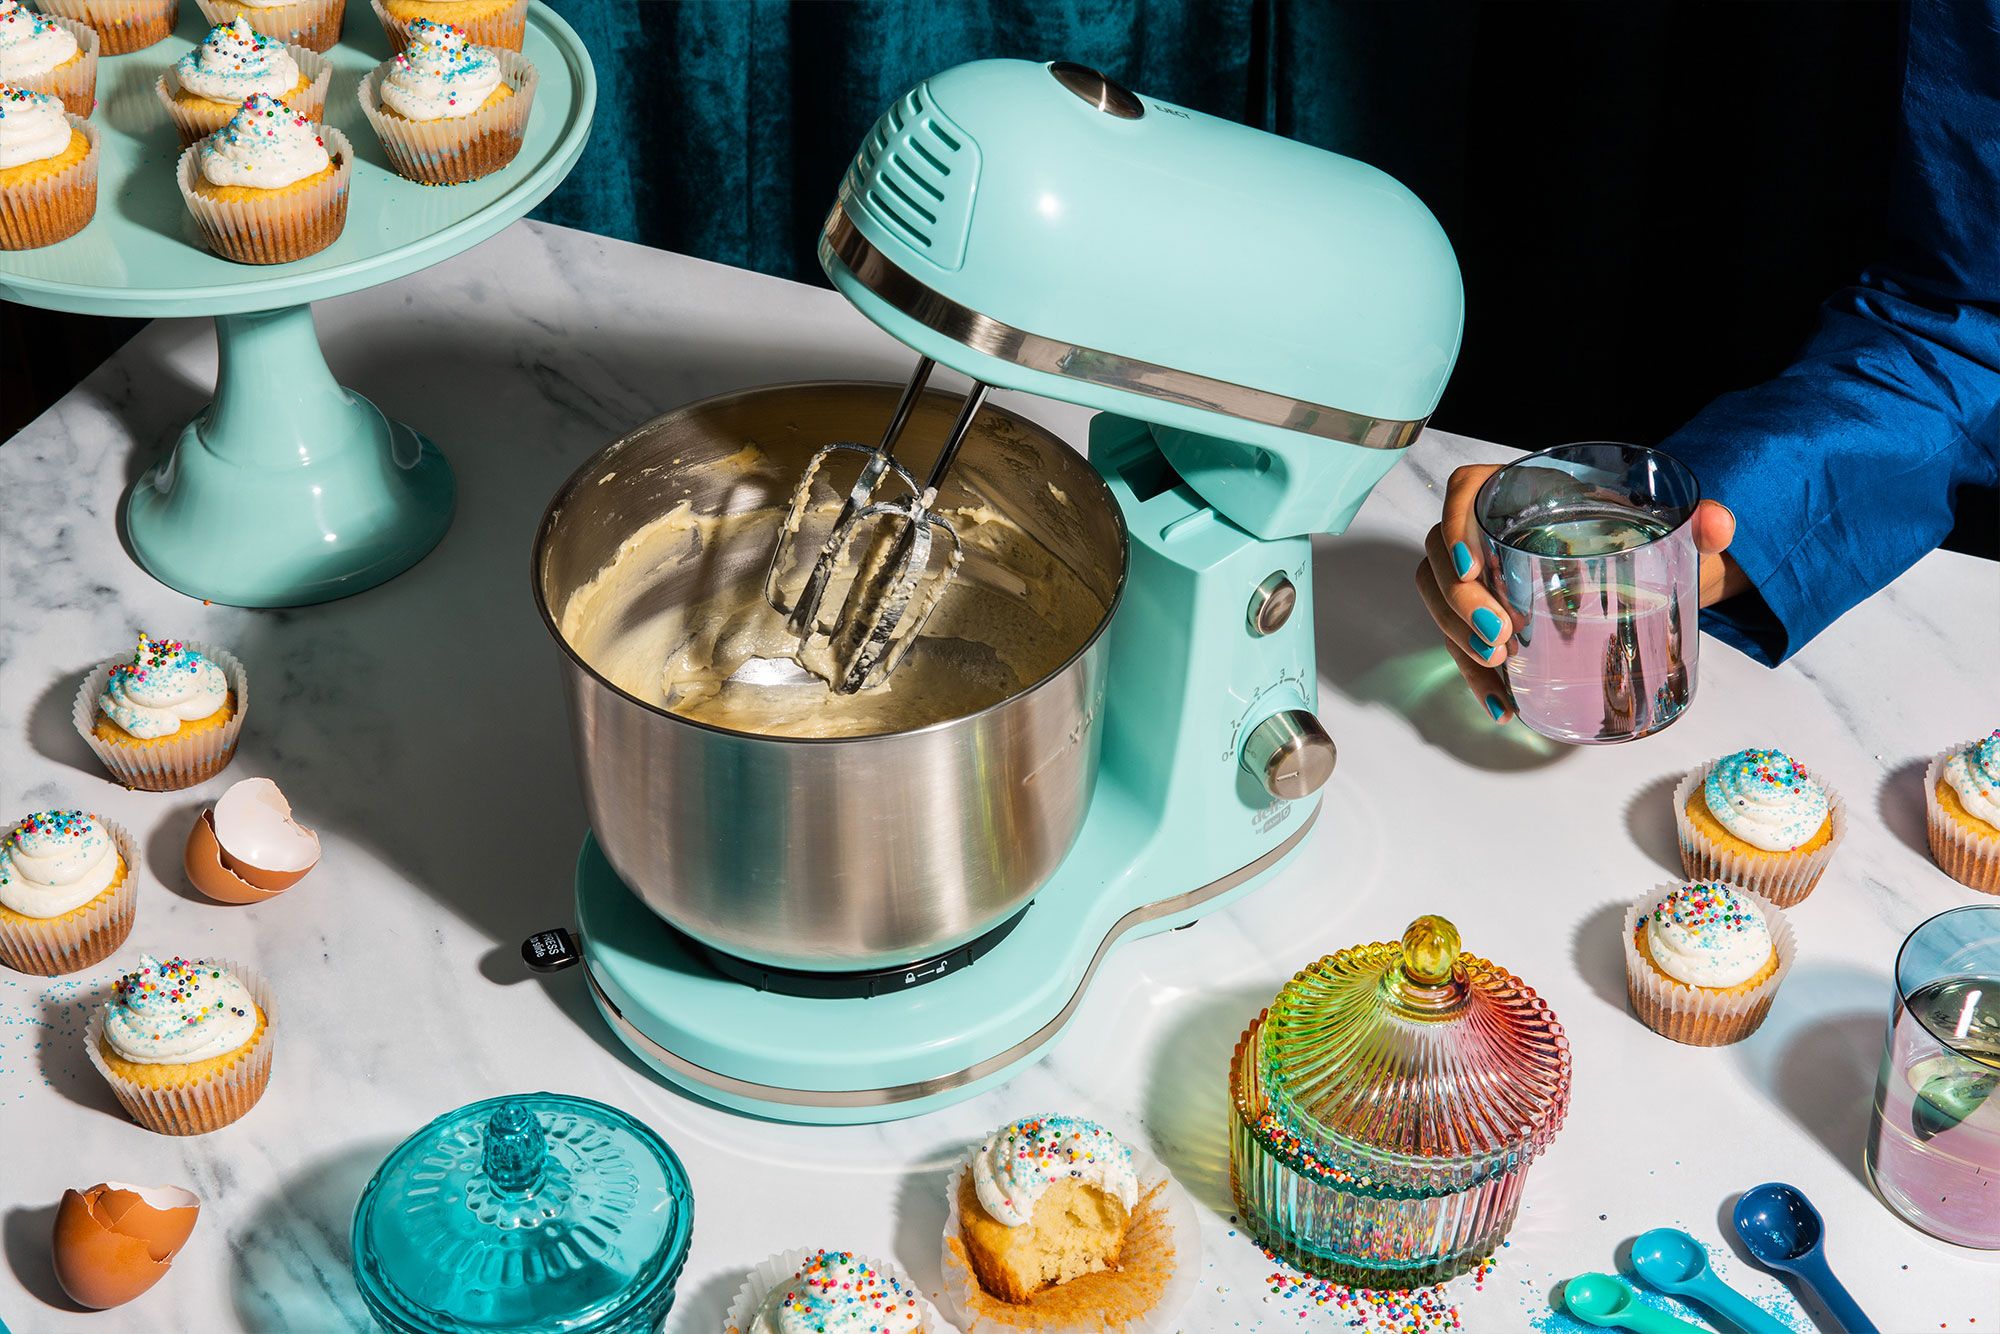 Delish by DASH Compact Stand Mixer, 3.5 Quart with Beaters & Dough